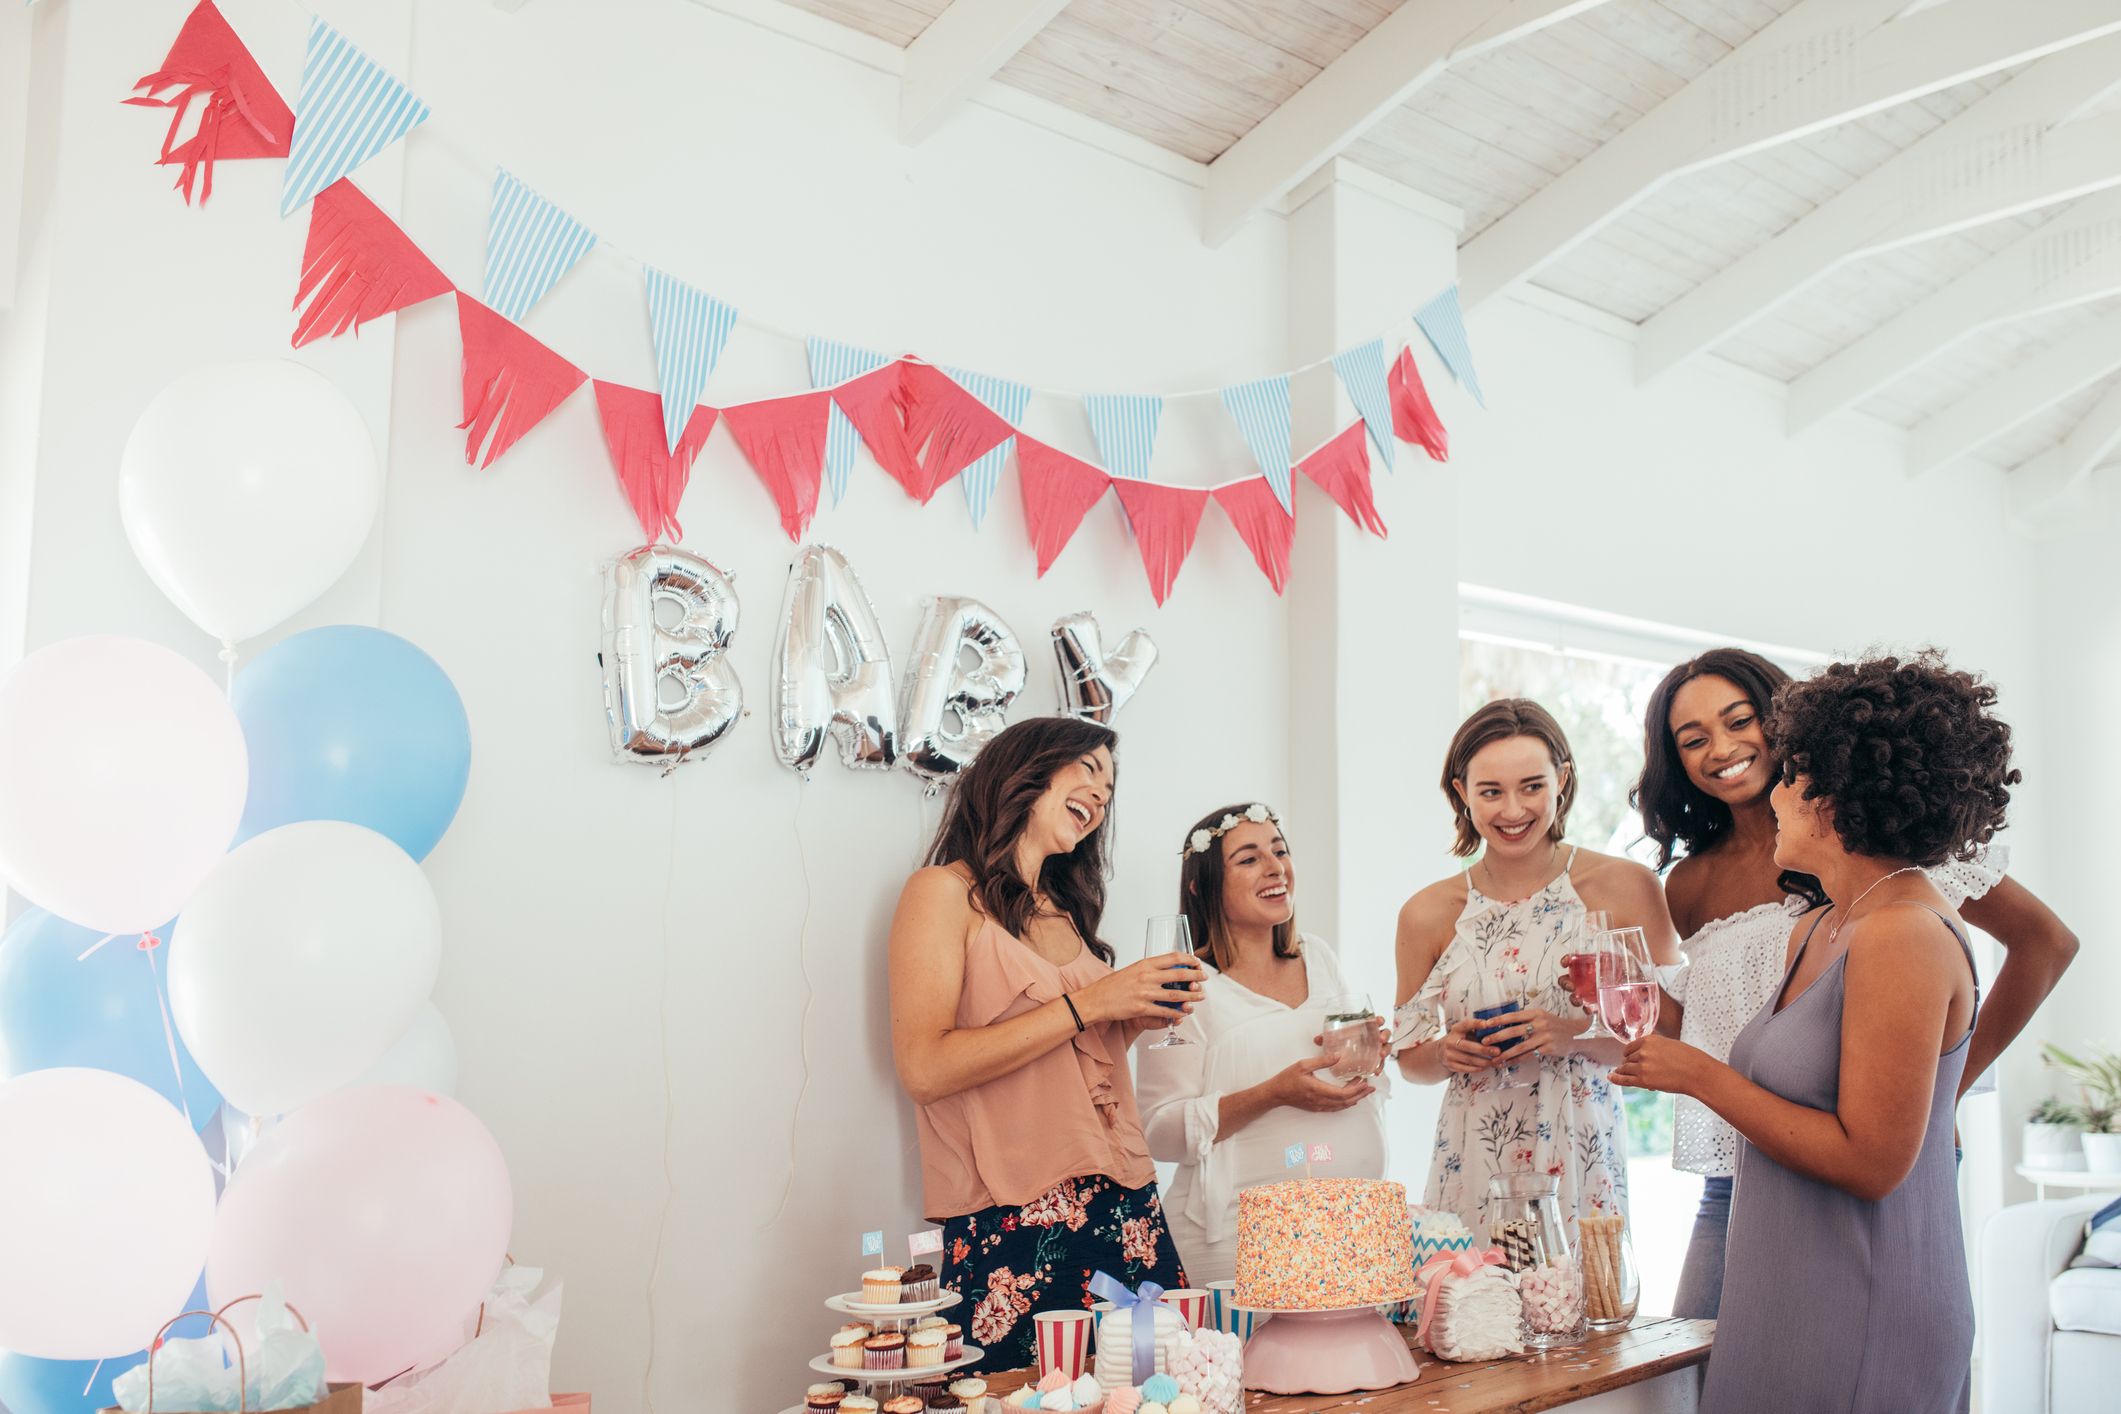 7 Do's & Dont's When Choosing a Baby Shower Gift